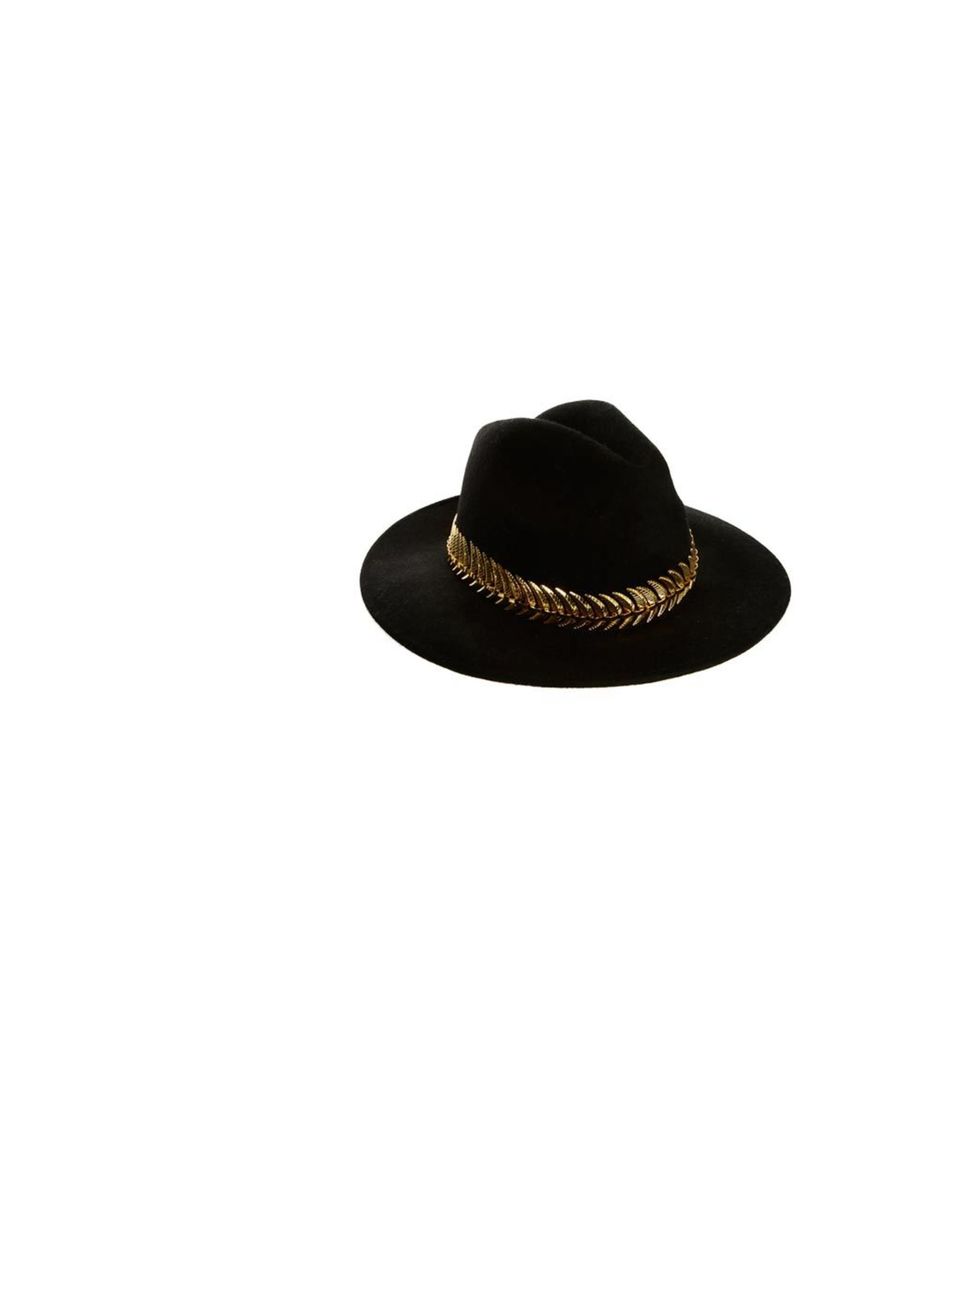 <p>Add a dash of drama to your looks with an embellished fedora, <a href="http://www.asos.com/ASOS/ASOS-Felt-Fedora-With-Metal-Band/Prod/pgeproduct.aspx?iid=2947051&amp;cid=6992&amp;Rf900=1423&amp;sh=0&amp;pge=0&amp;pgesize=36&amp;sort=-1&amp;clr=Black">A